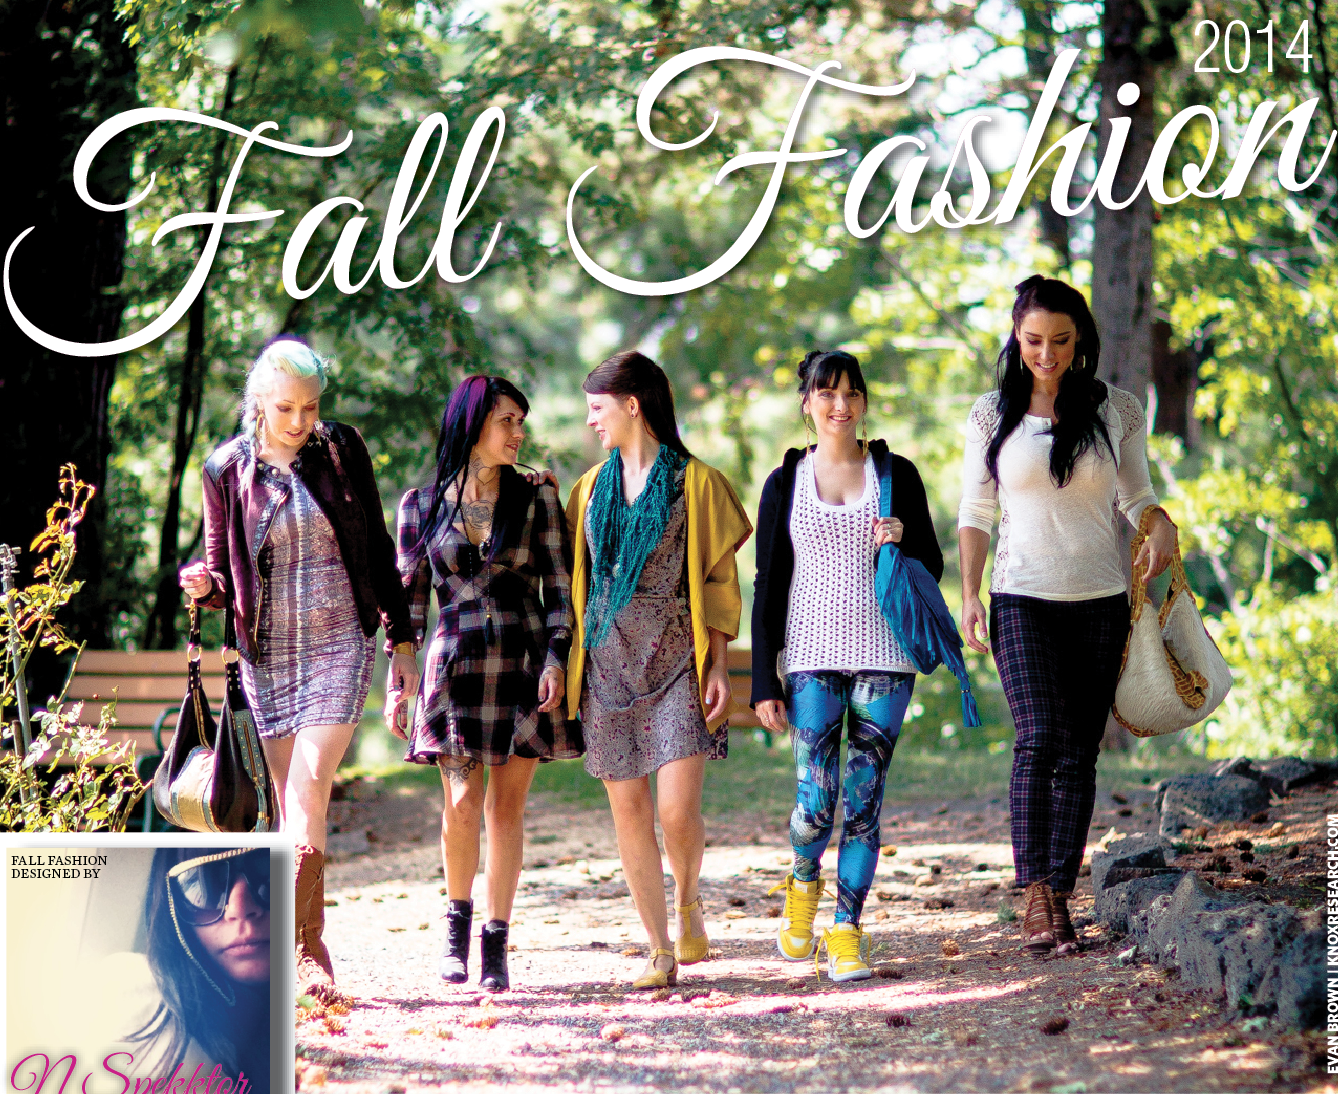 All About Fashion Stuff: October 2014